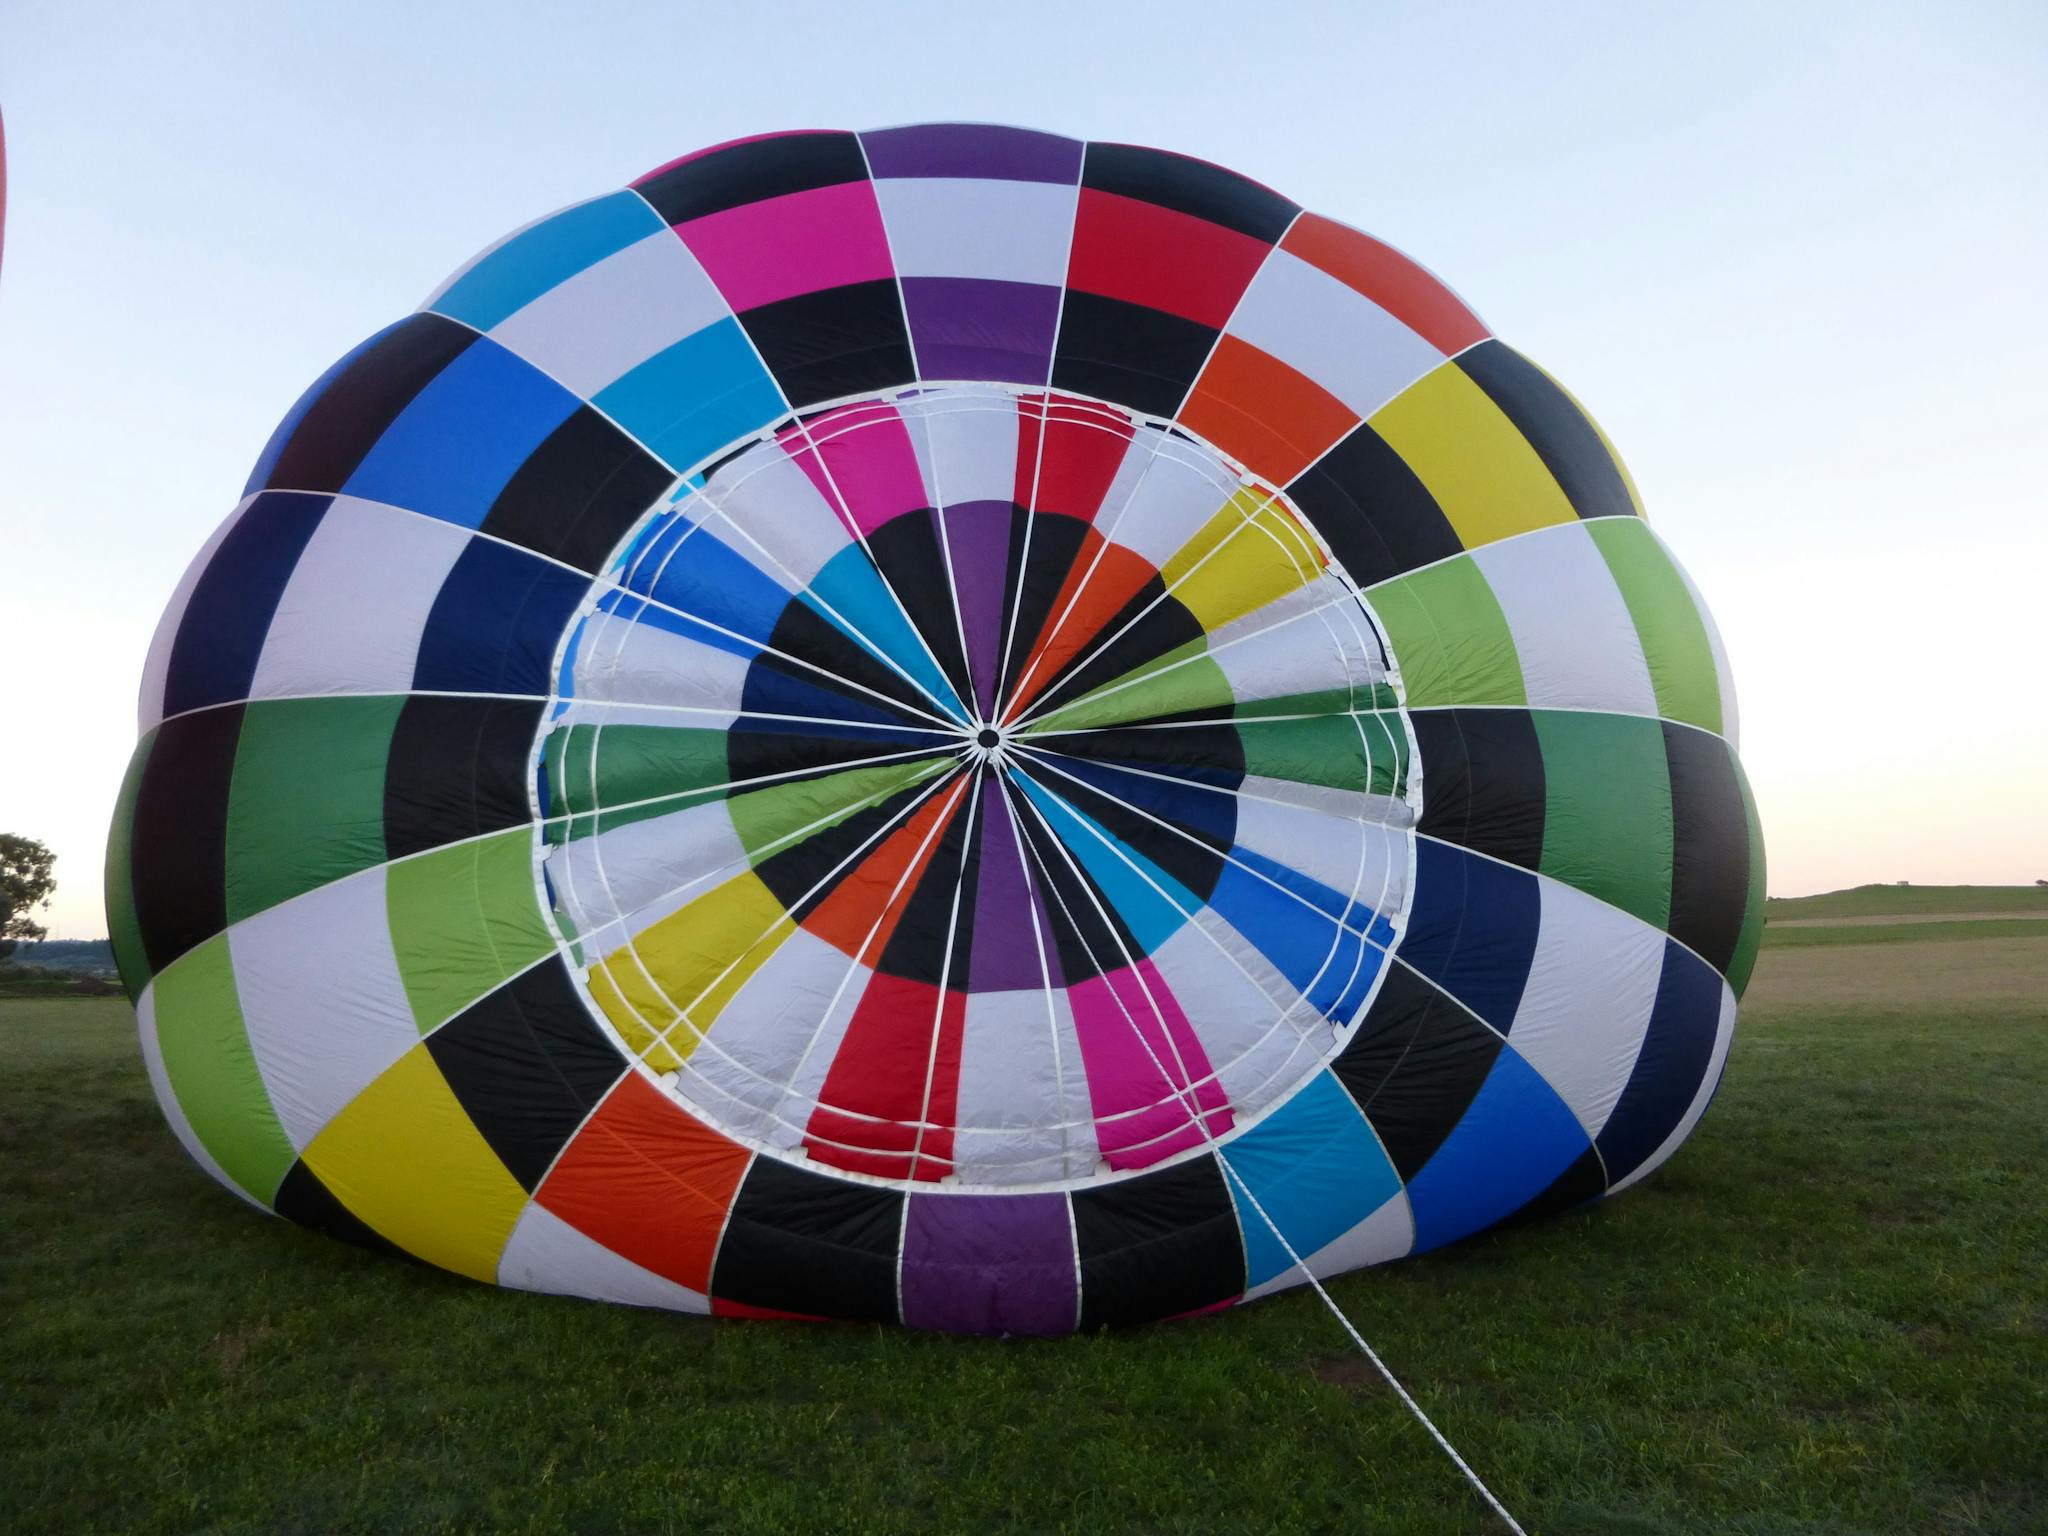 The top of a balloon on inflation